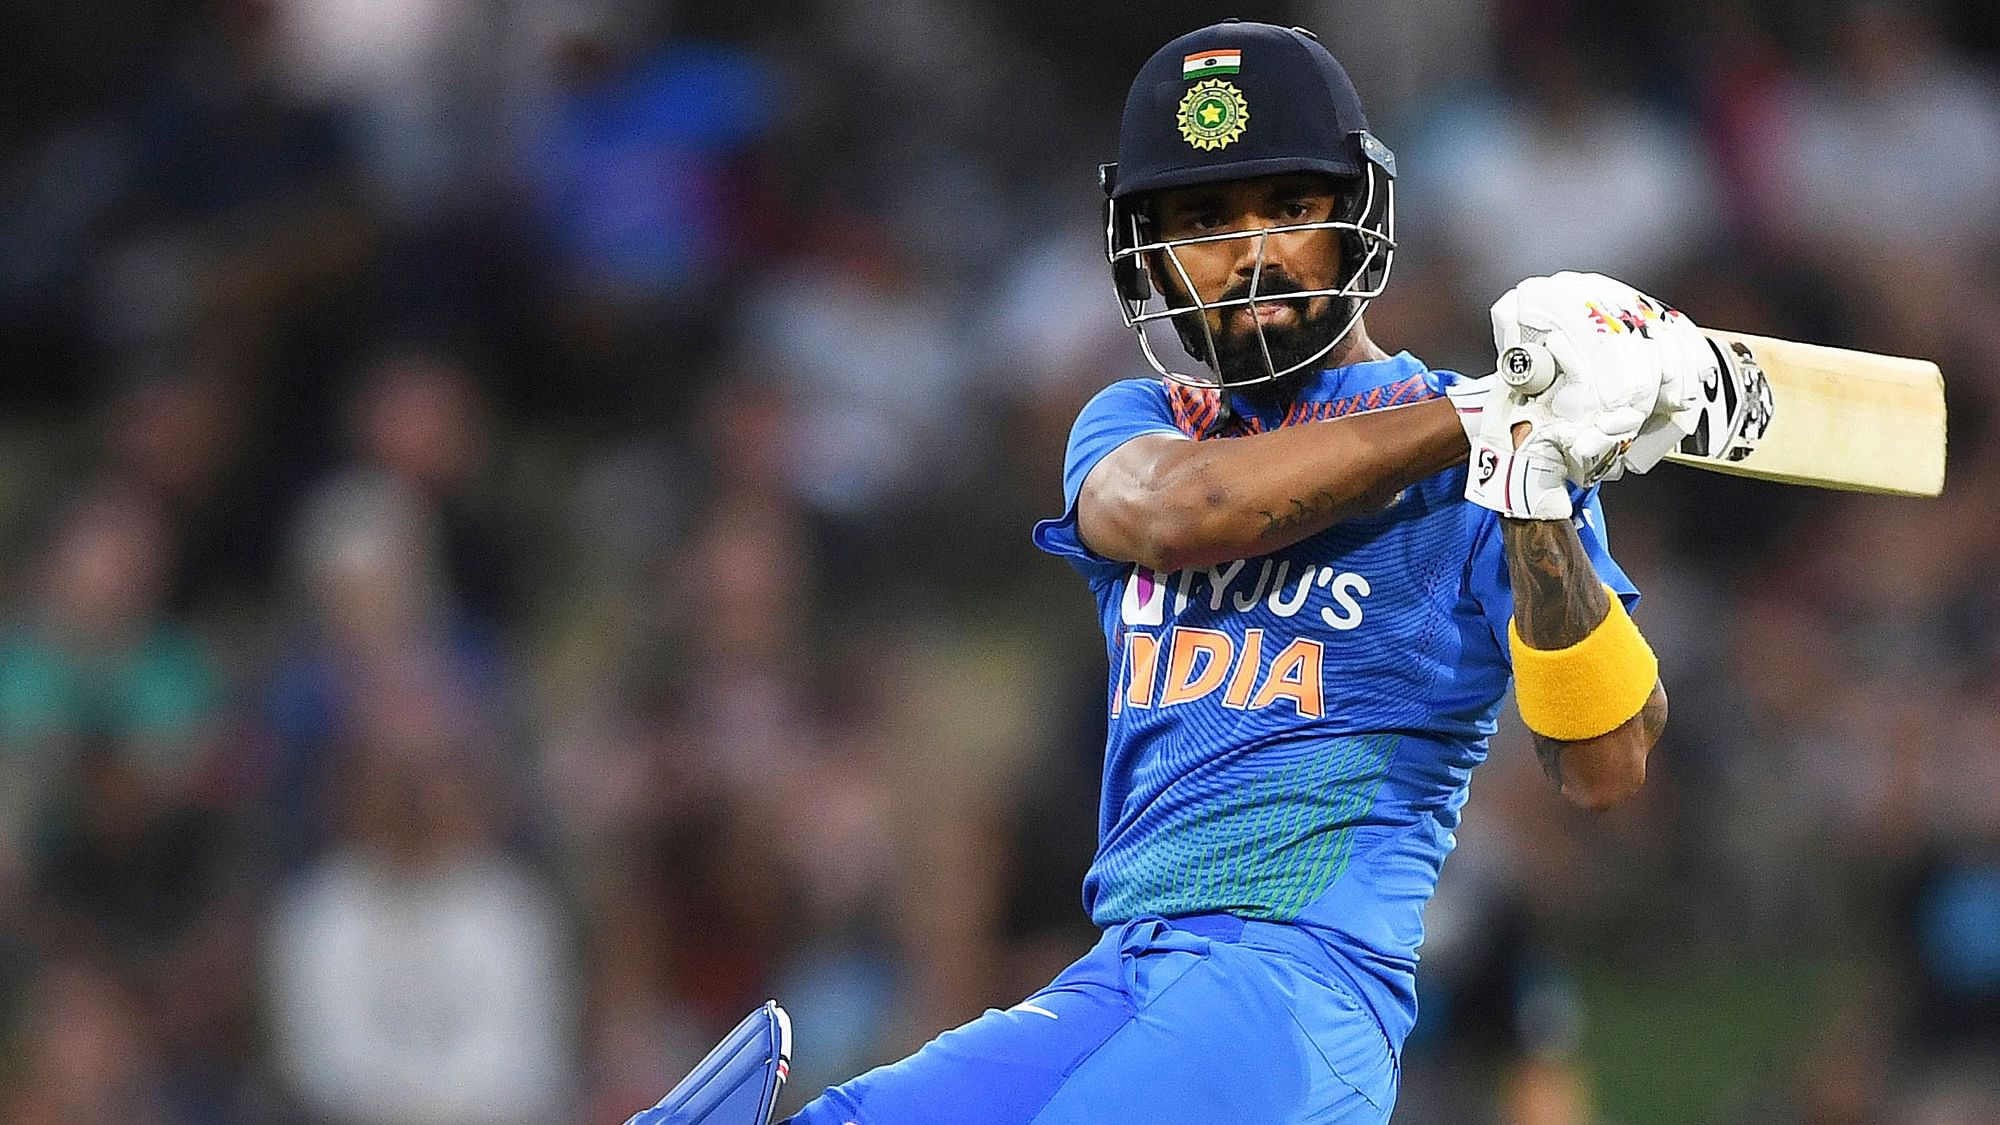 KL Rahul reaped rewards for his stellar all-round show in India’s 5-0 drubbing of New Zealand as he rose to a career-best second position in the ICC T20 Rankings released on Monday, 3 February.